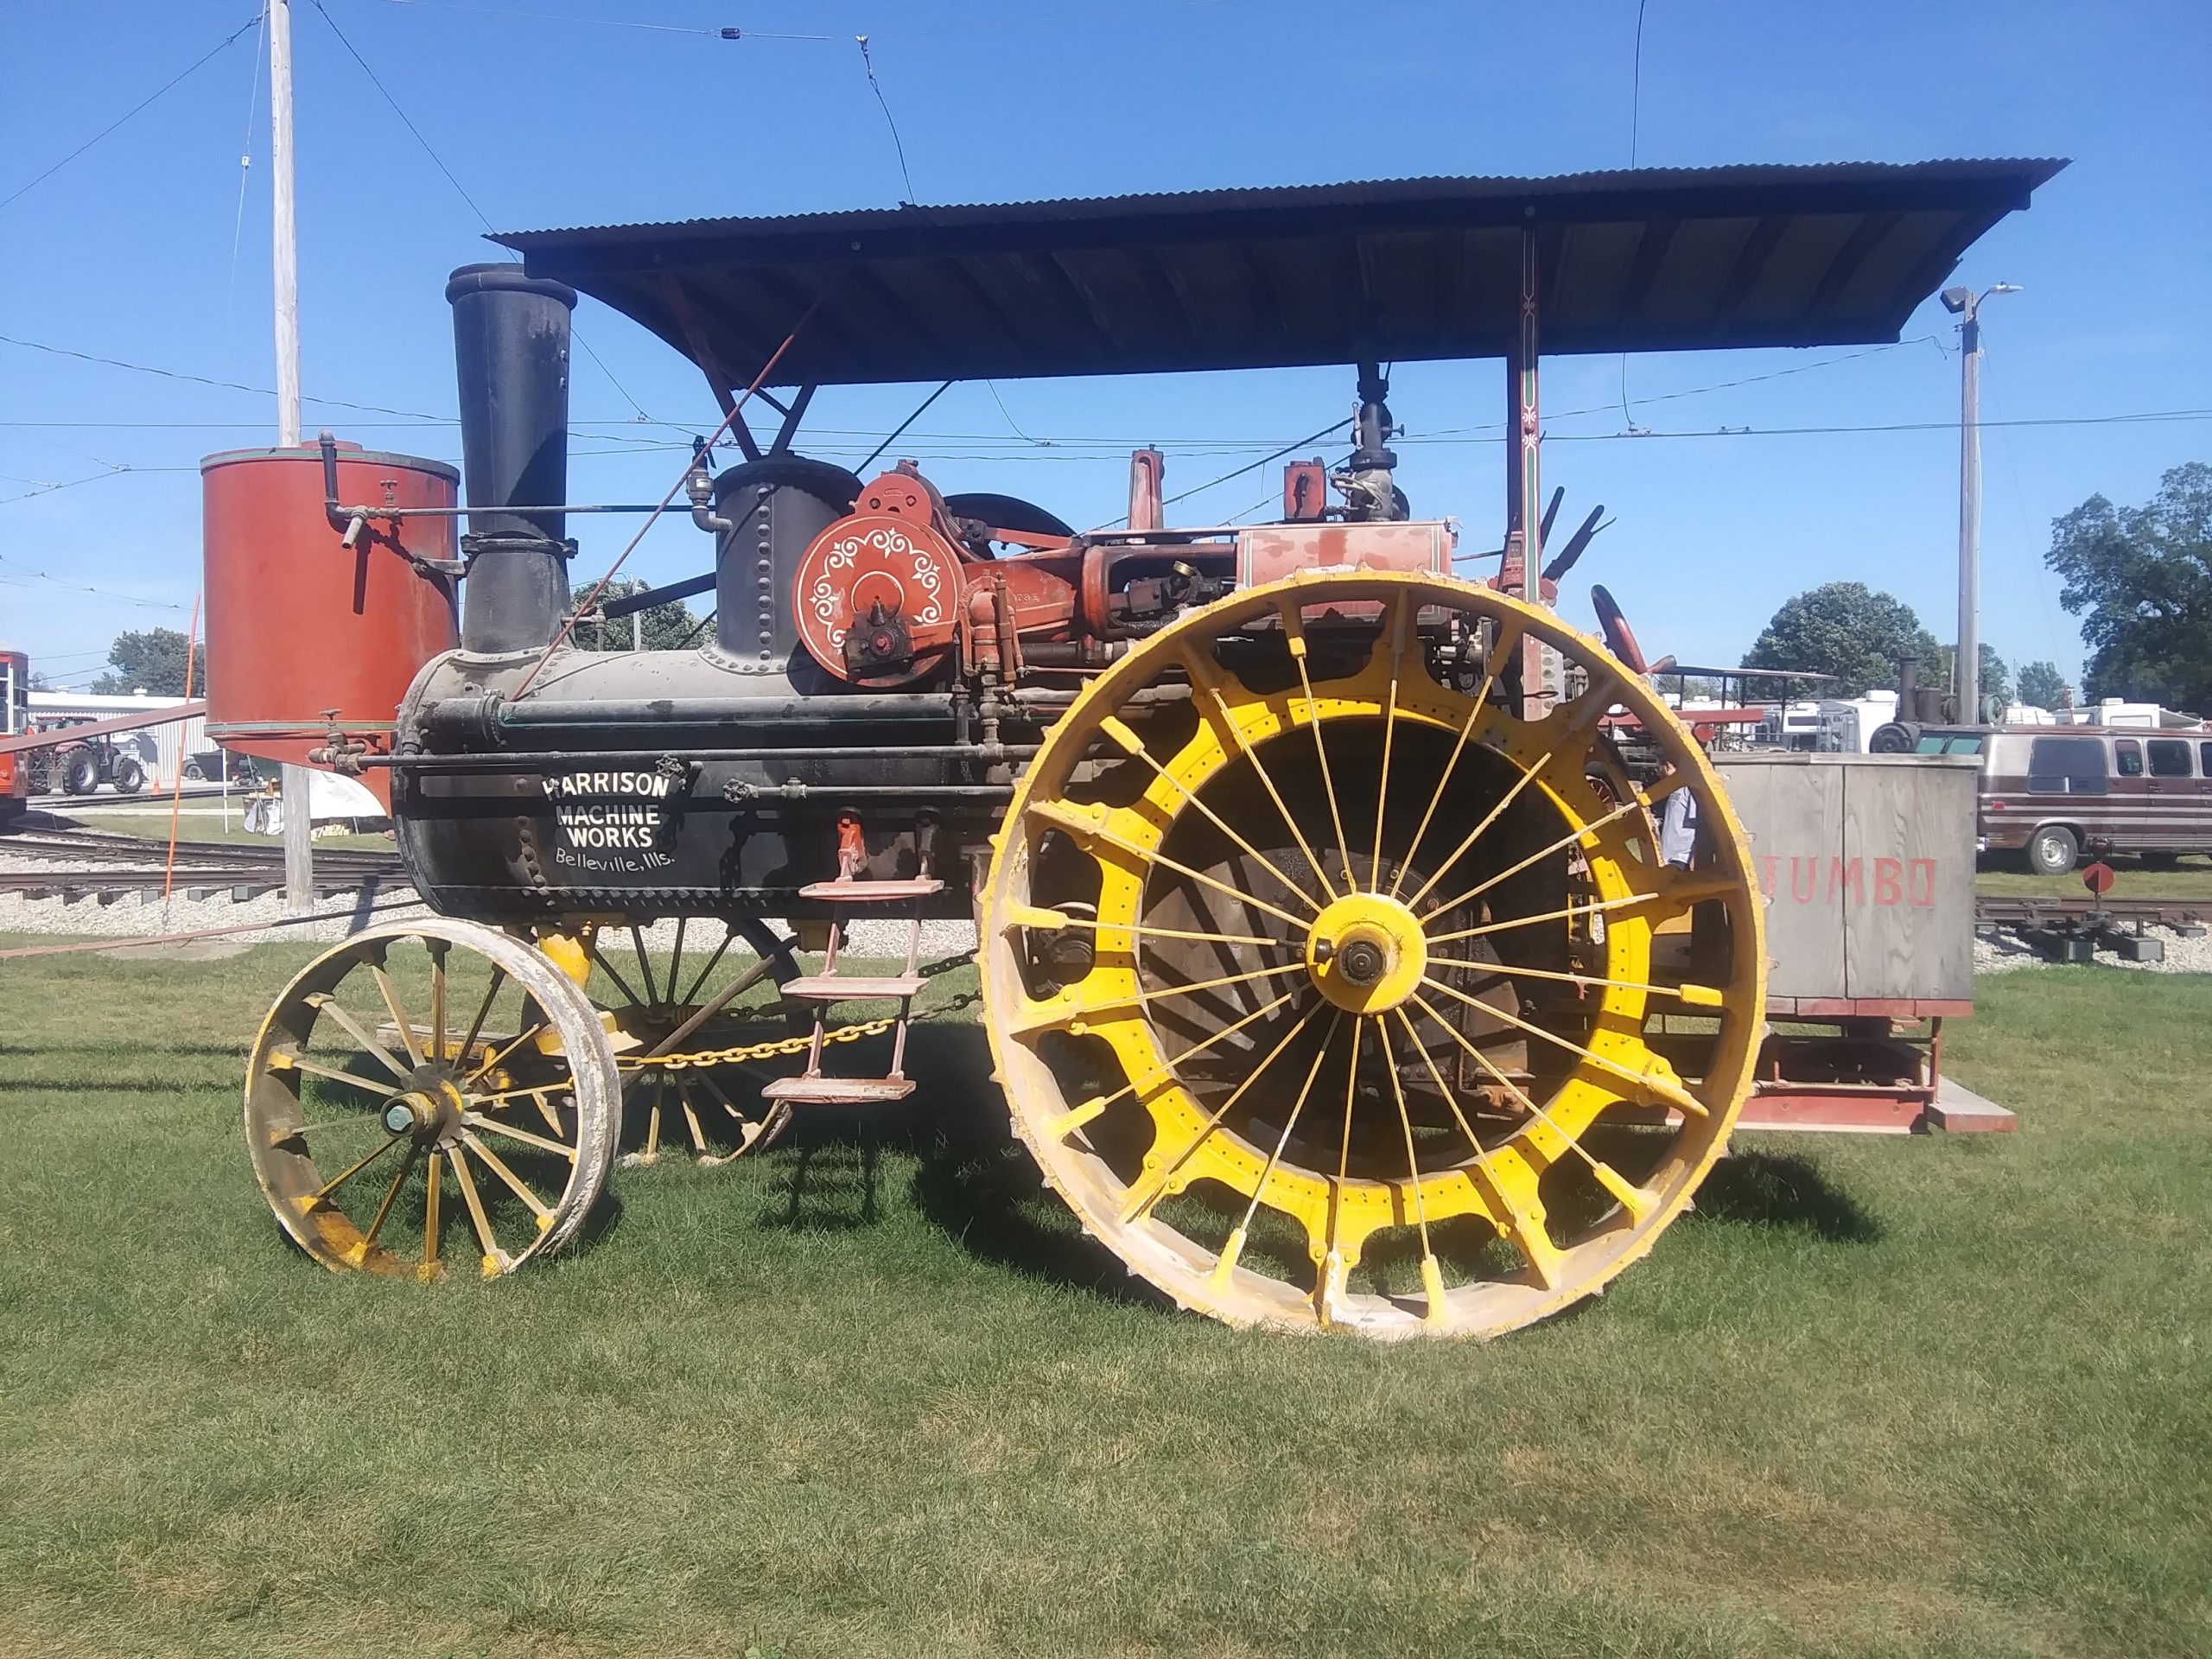 Antique tractor - Midwest Old Threshers Reunion